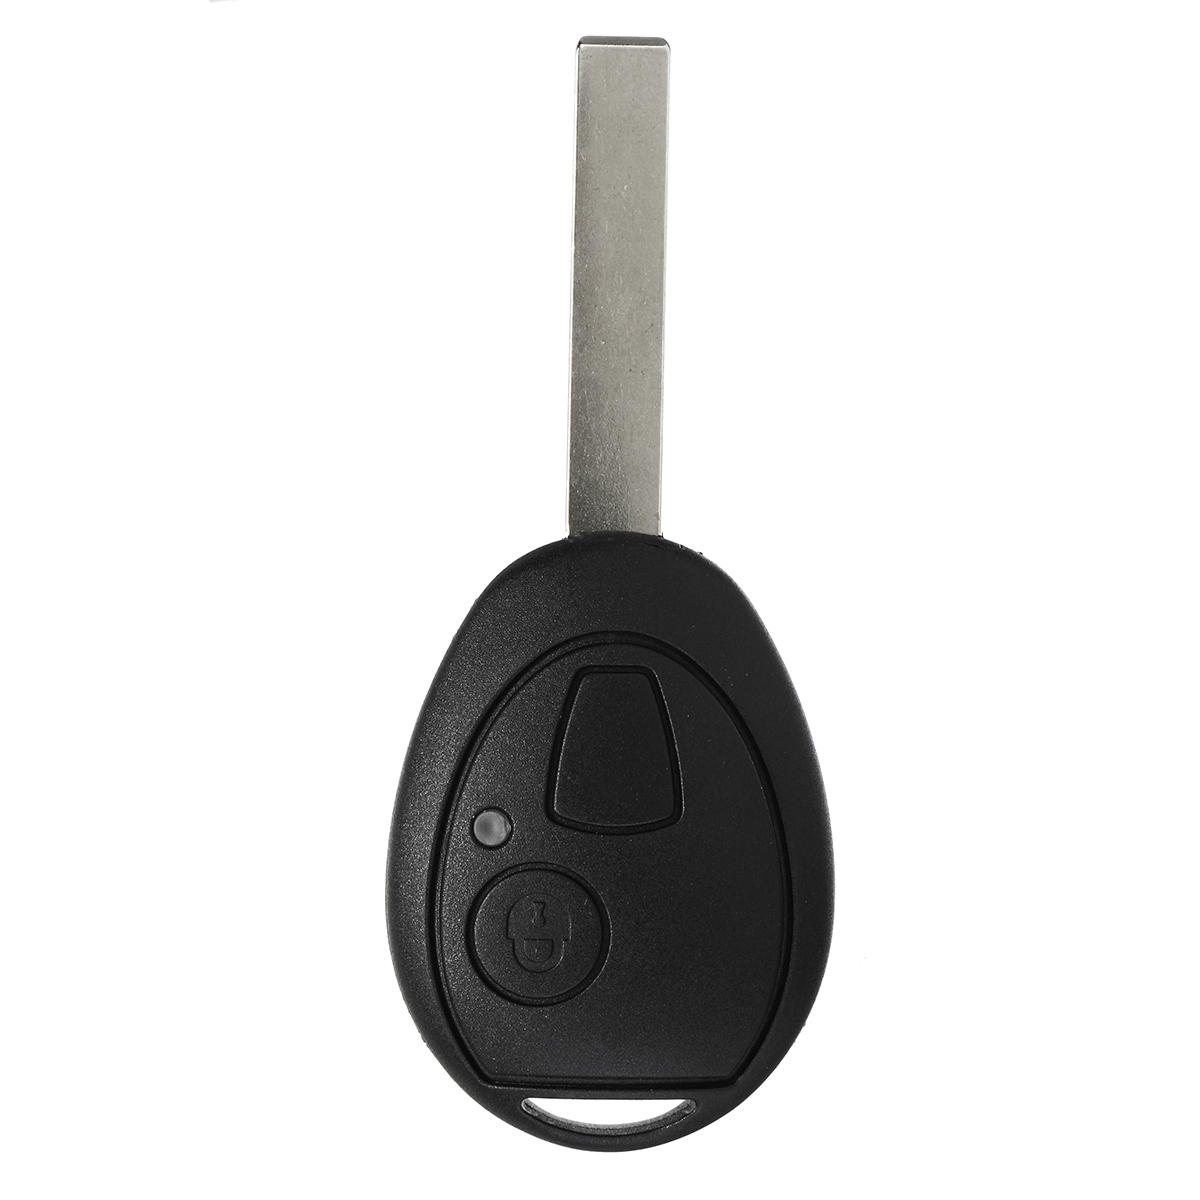 2 Buttons Remote Key Case Fob Shell for BMW Mini ONE Cooper R50 R53 01-080